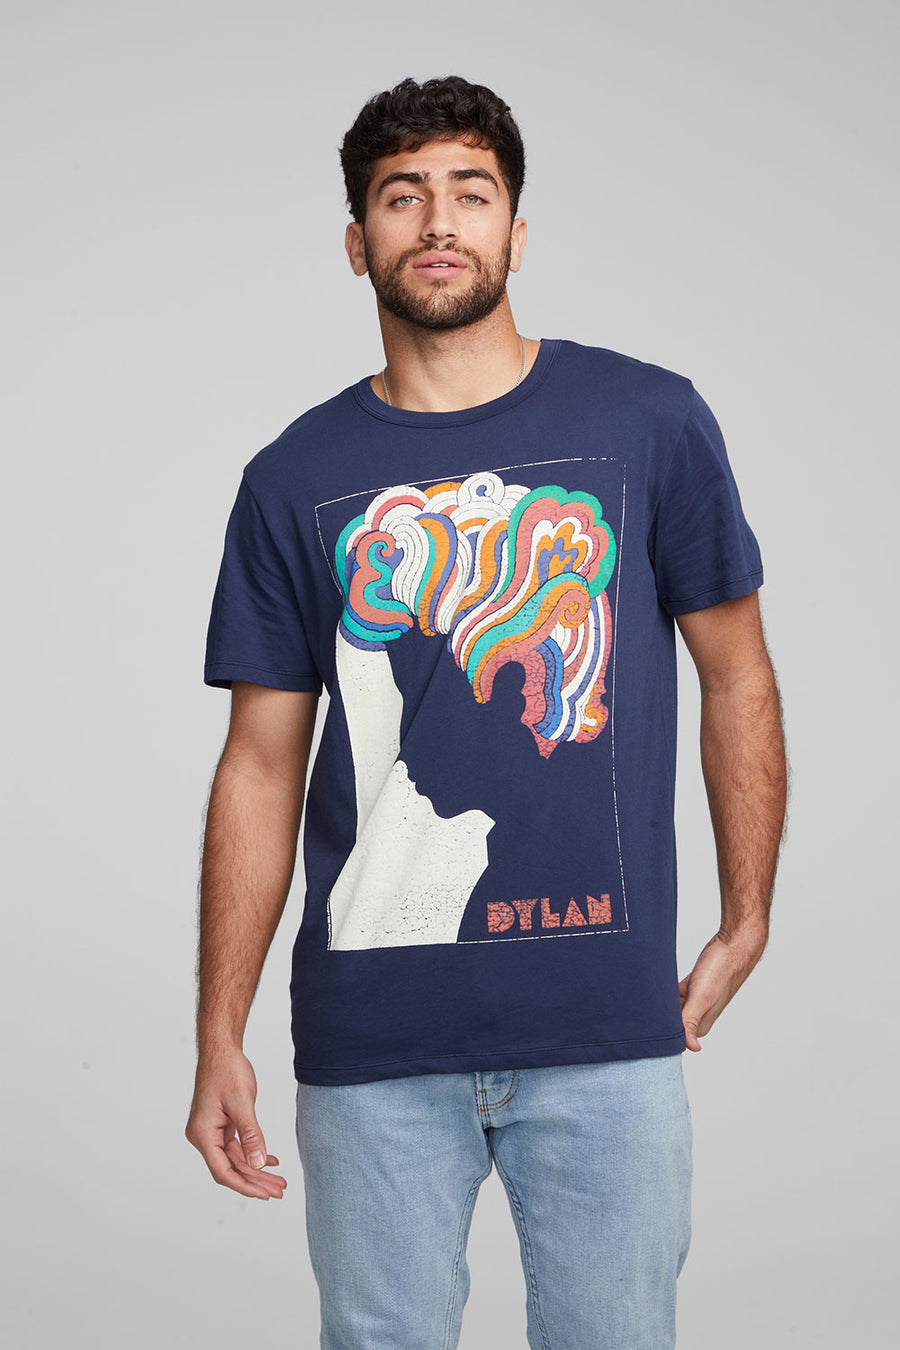 Bob Dylan Retro Poster Crew Neck Tee MENS chaserbrand